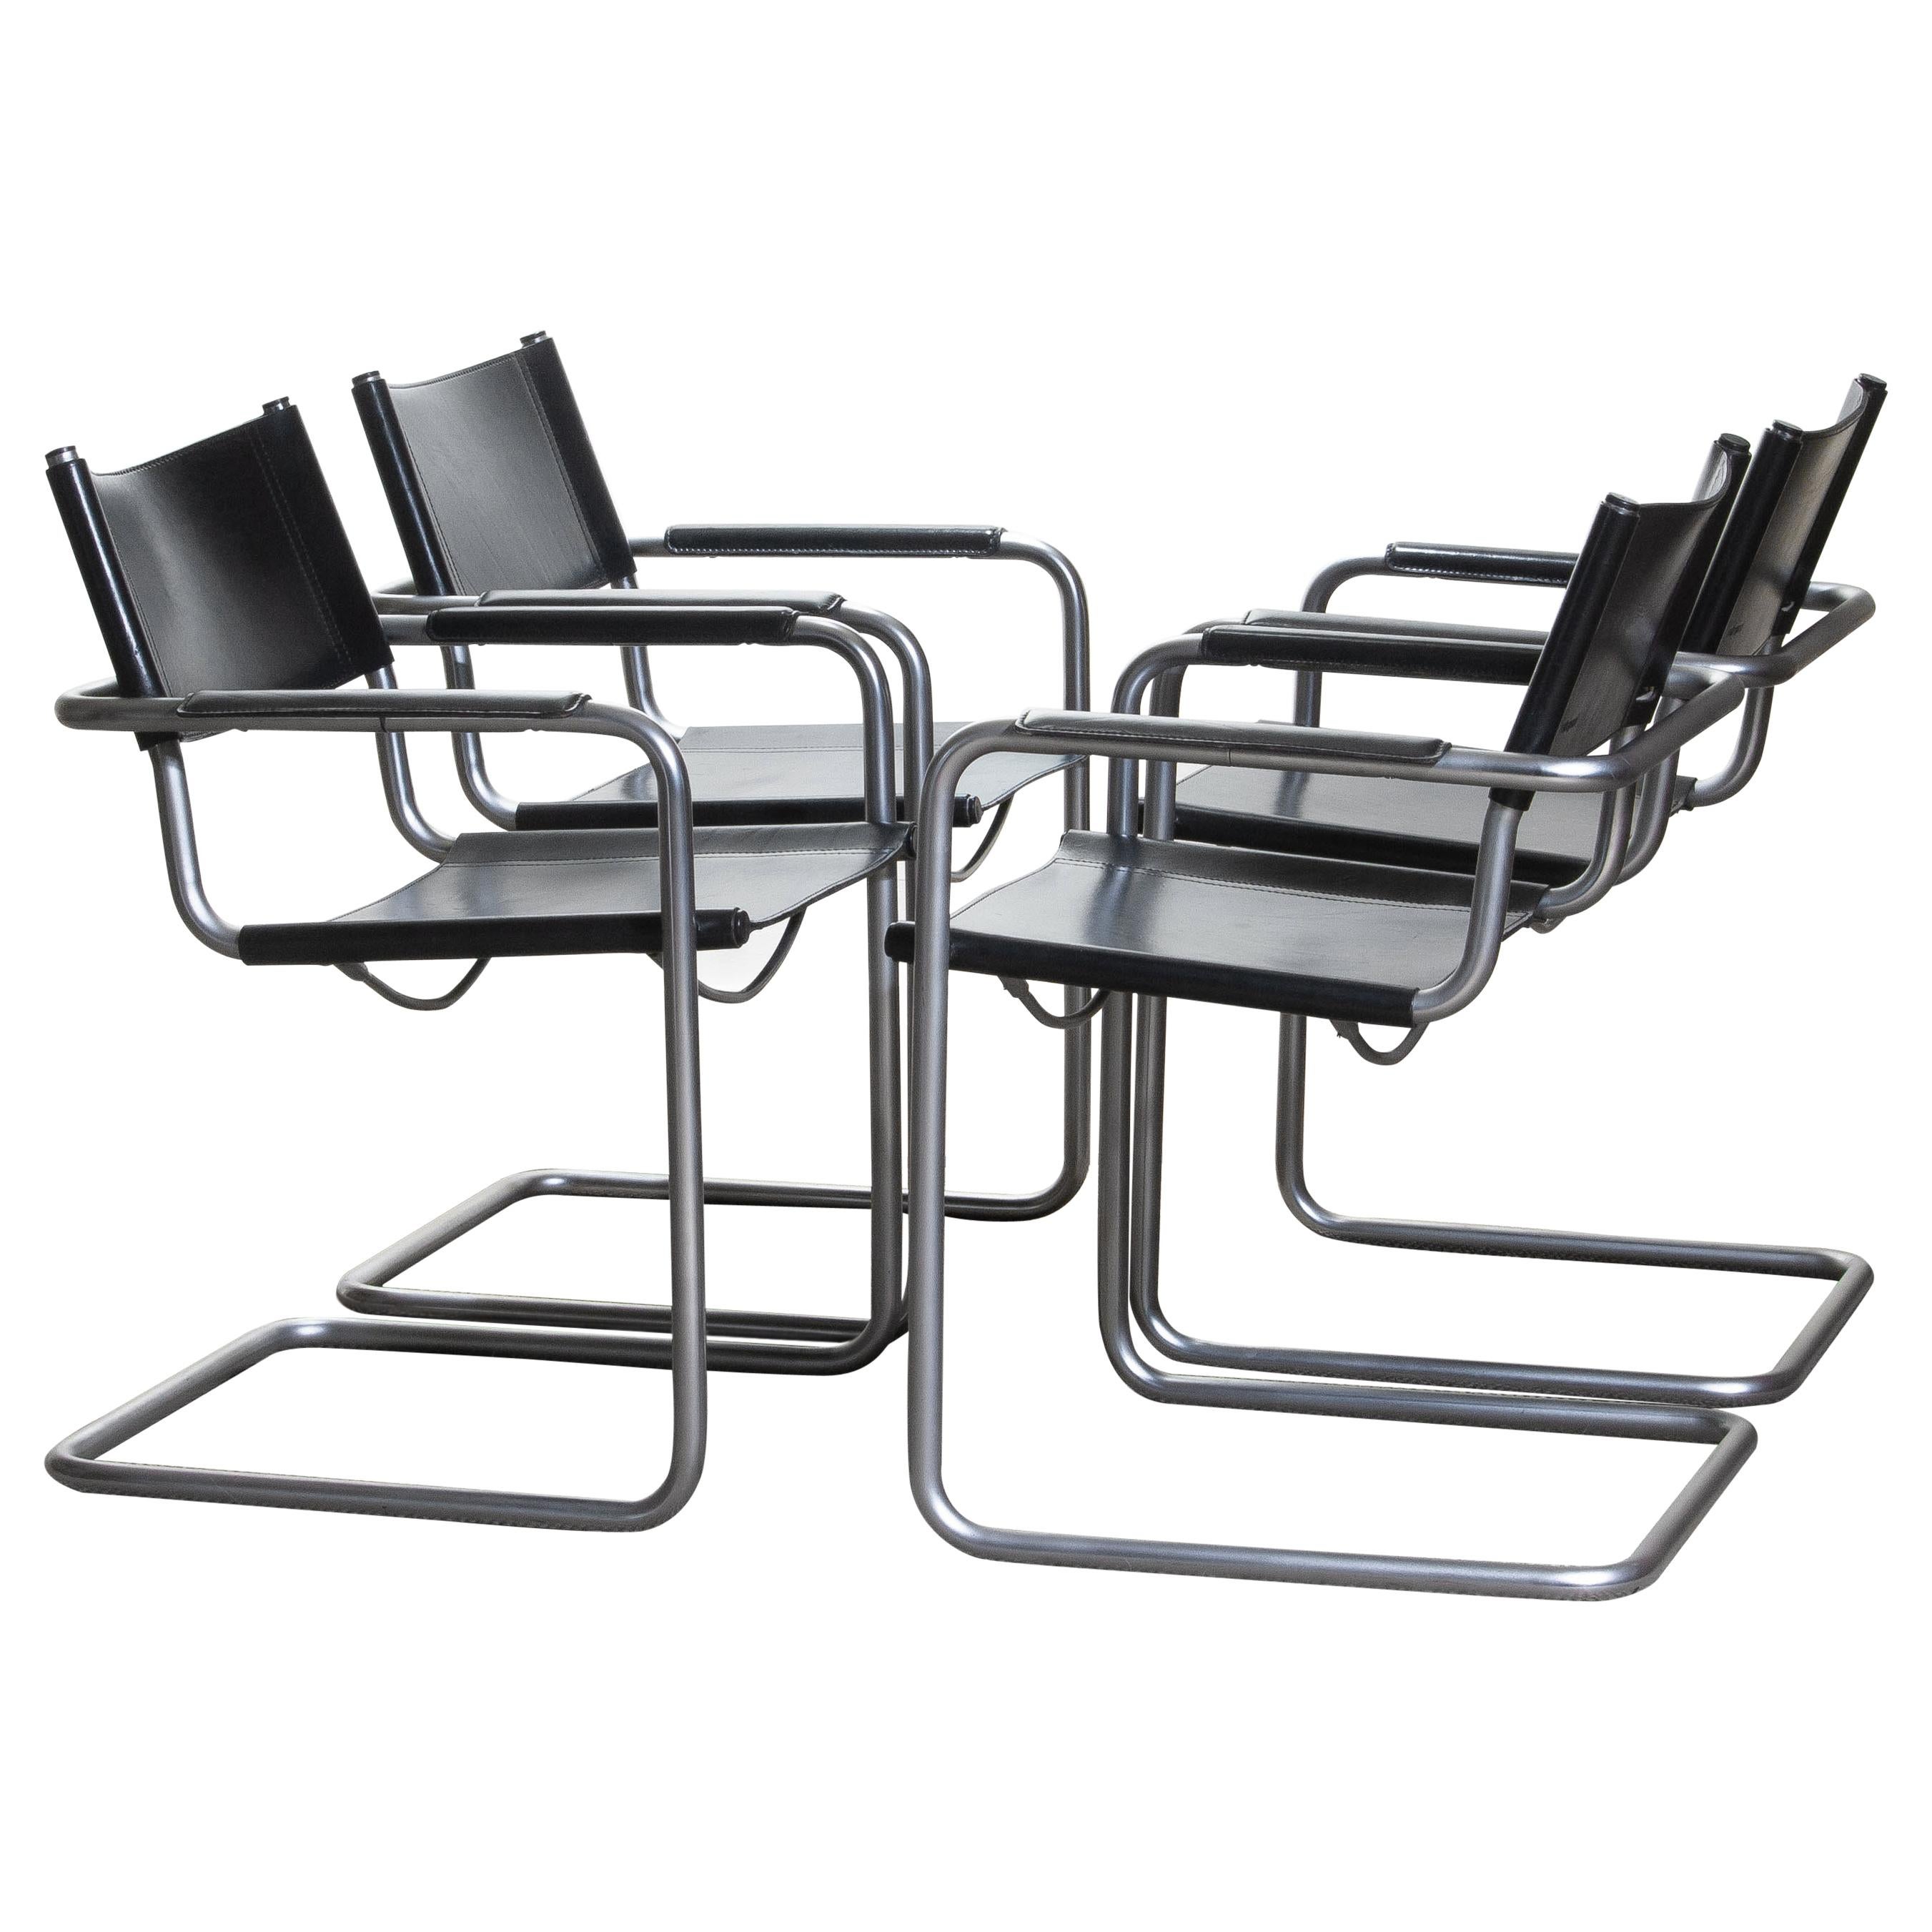 1970. Perfect set of four dining / office chairs made by Matteo Grassi, Italy.
The chairs have tubular titanium look steel frames with sturdy black leather seating and backrest.
They are signed on the back of the backrest.
Overall condition is